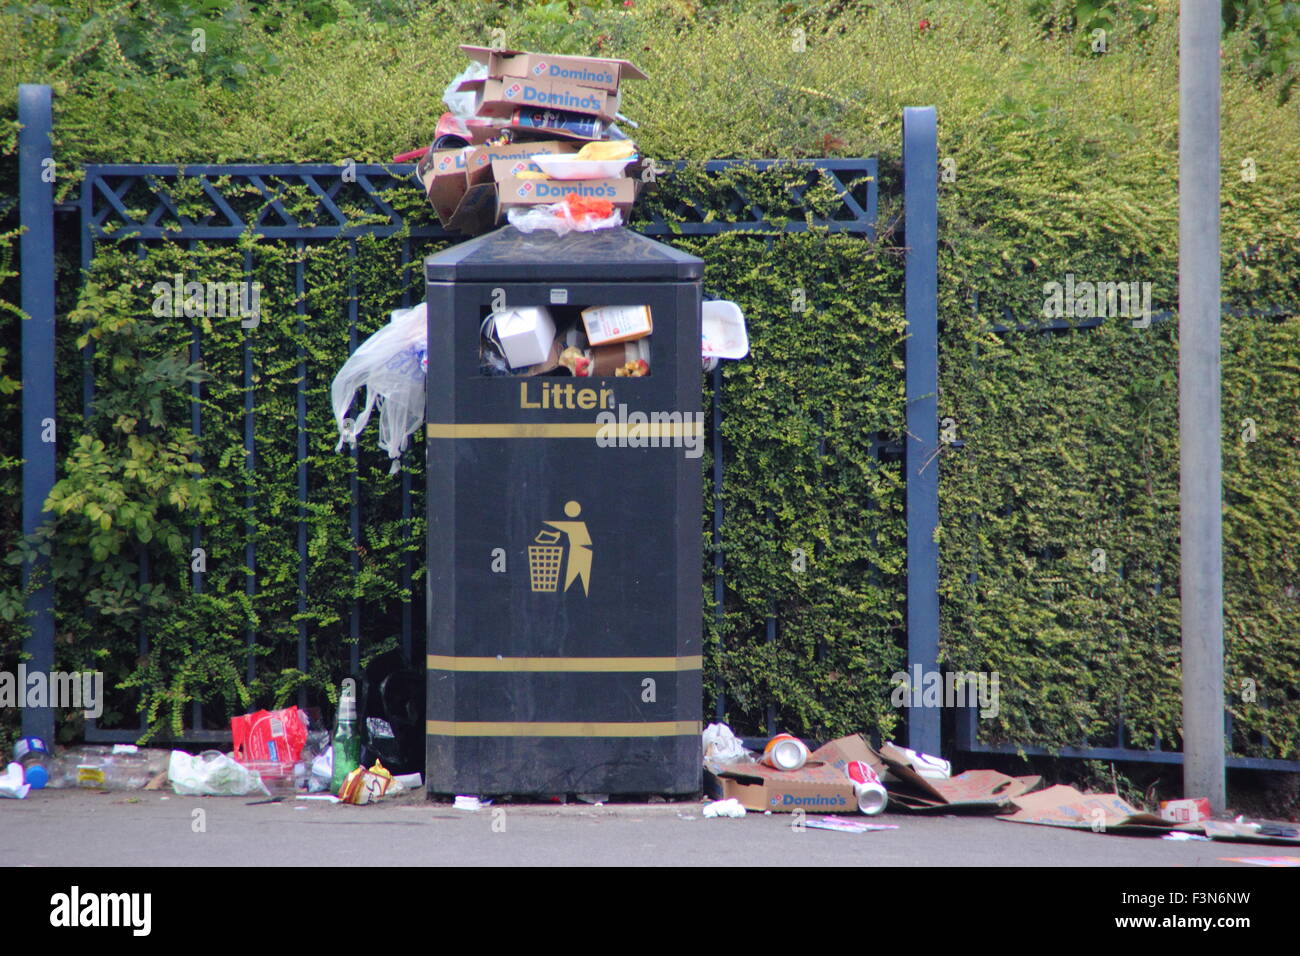 A litter bin overflows with rubbish on a street in Sheffield, South Yorkshire, England UK Stock Photo